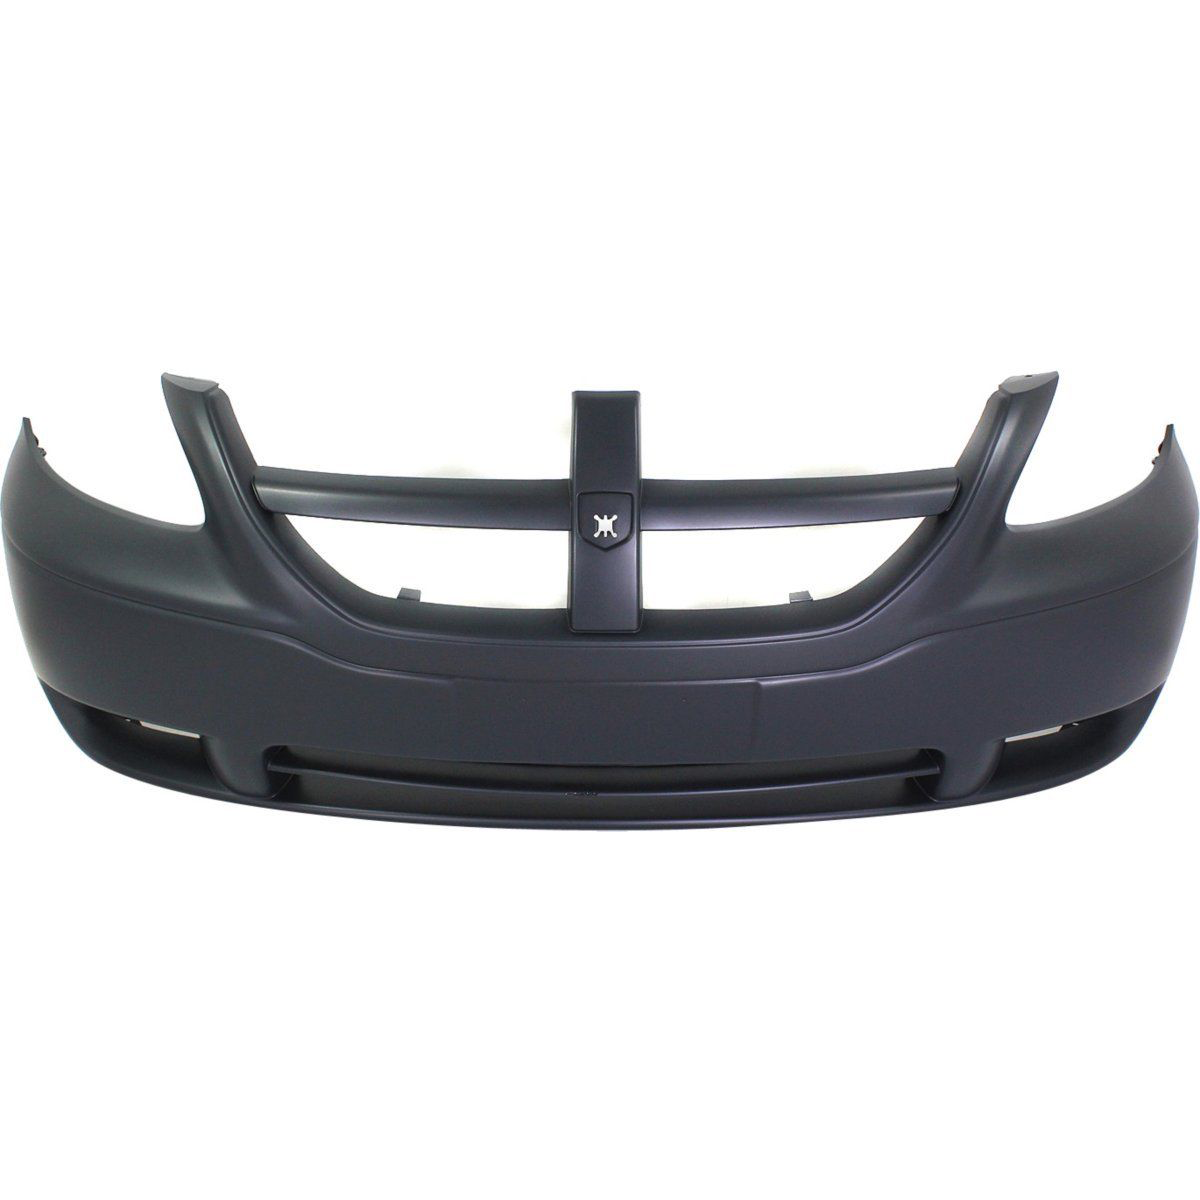 2005-2007 DODGE CARAVAN Front Bumper Cover w/o Fog Lamps Painted to Match